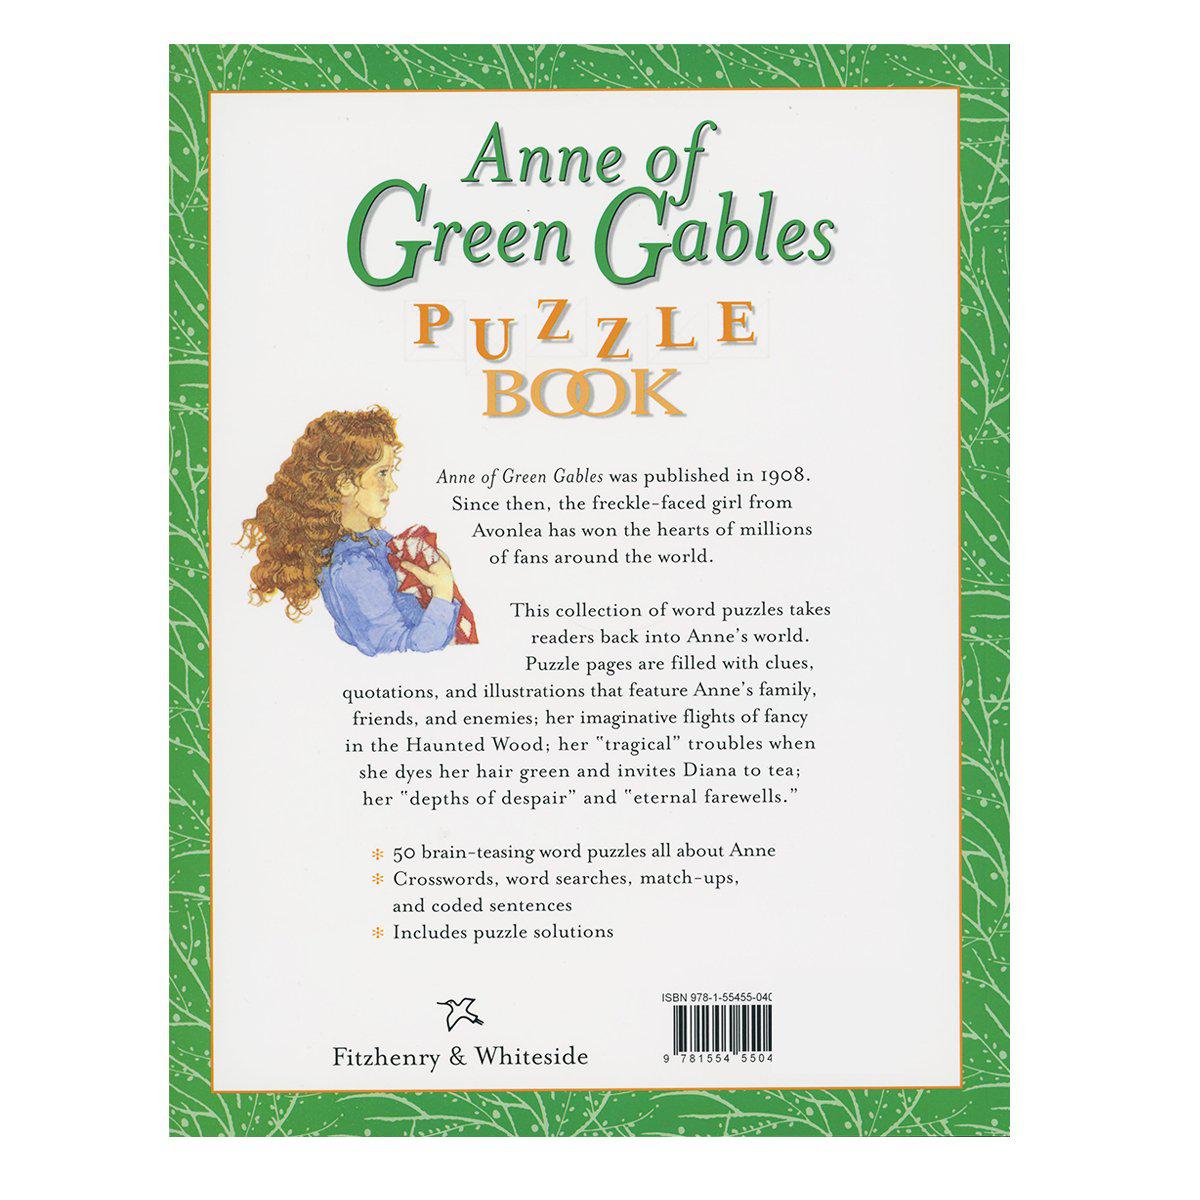 "Anne of Green Gables" Puzzle Book